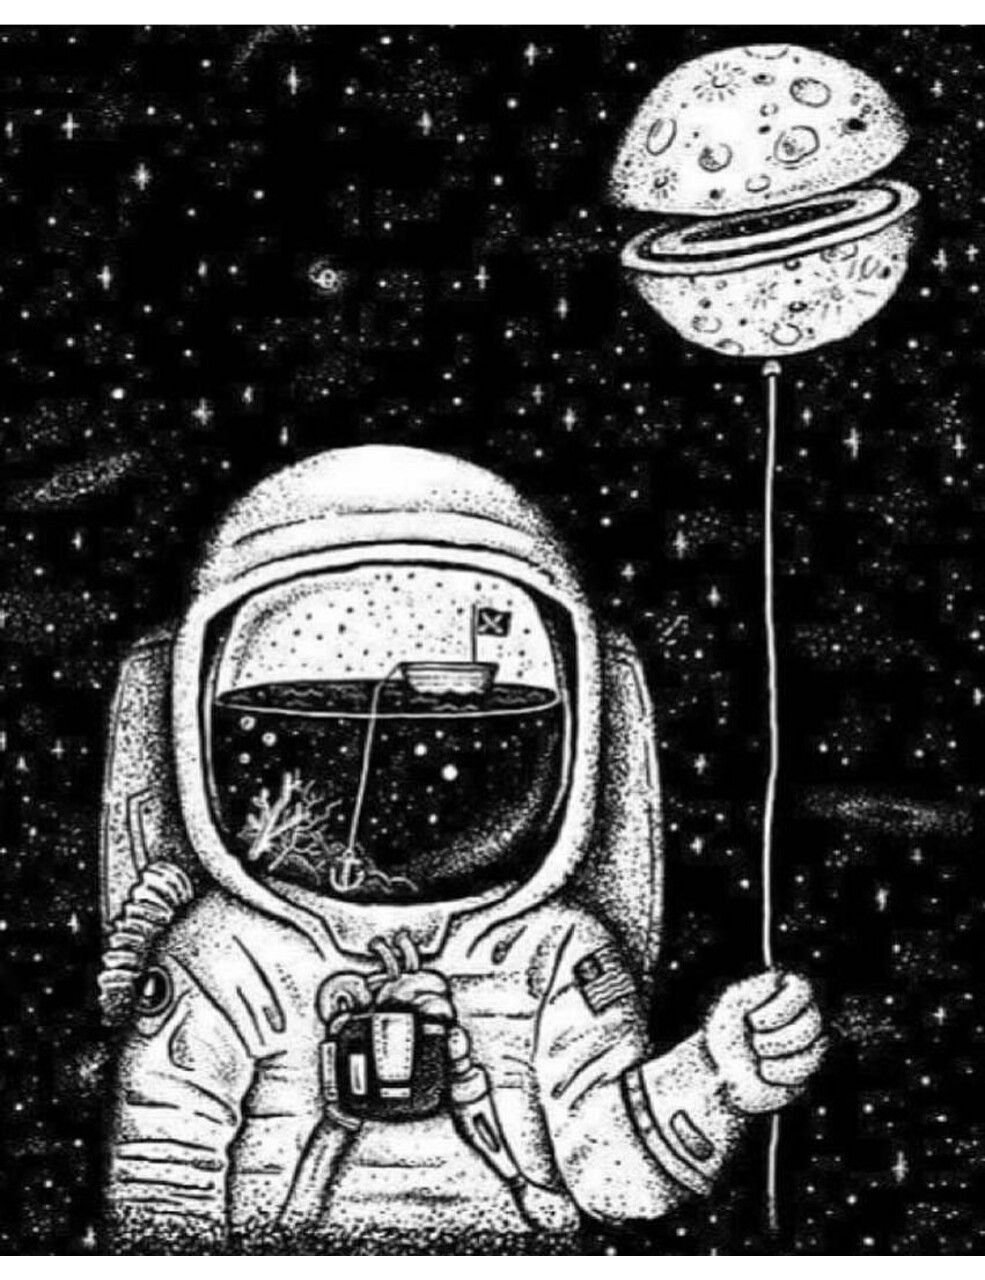 Free download trippy space wallpaper cartoon x for your desktop mobile tablet explore astronaut girl aesthetic wallpapers astronaut wallpaper cool astronaut wallpapers burning astronaut wallpaper